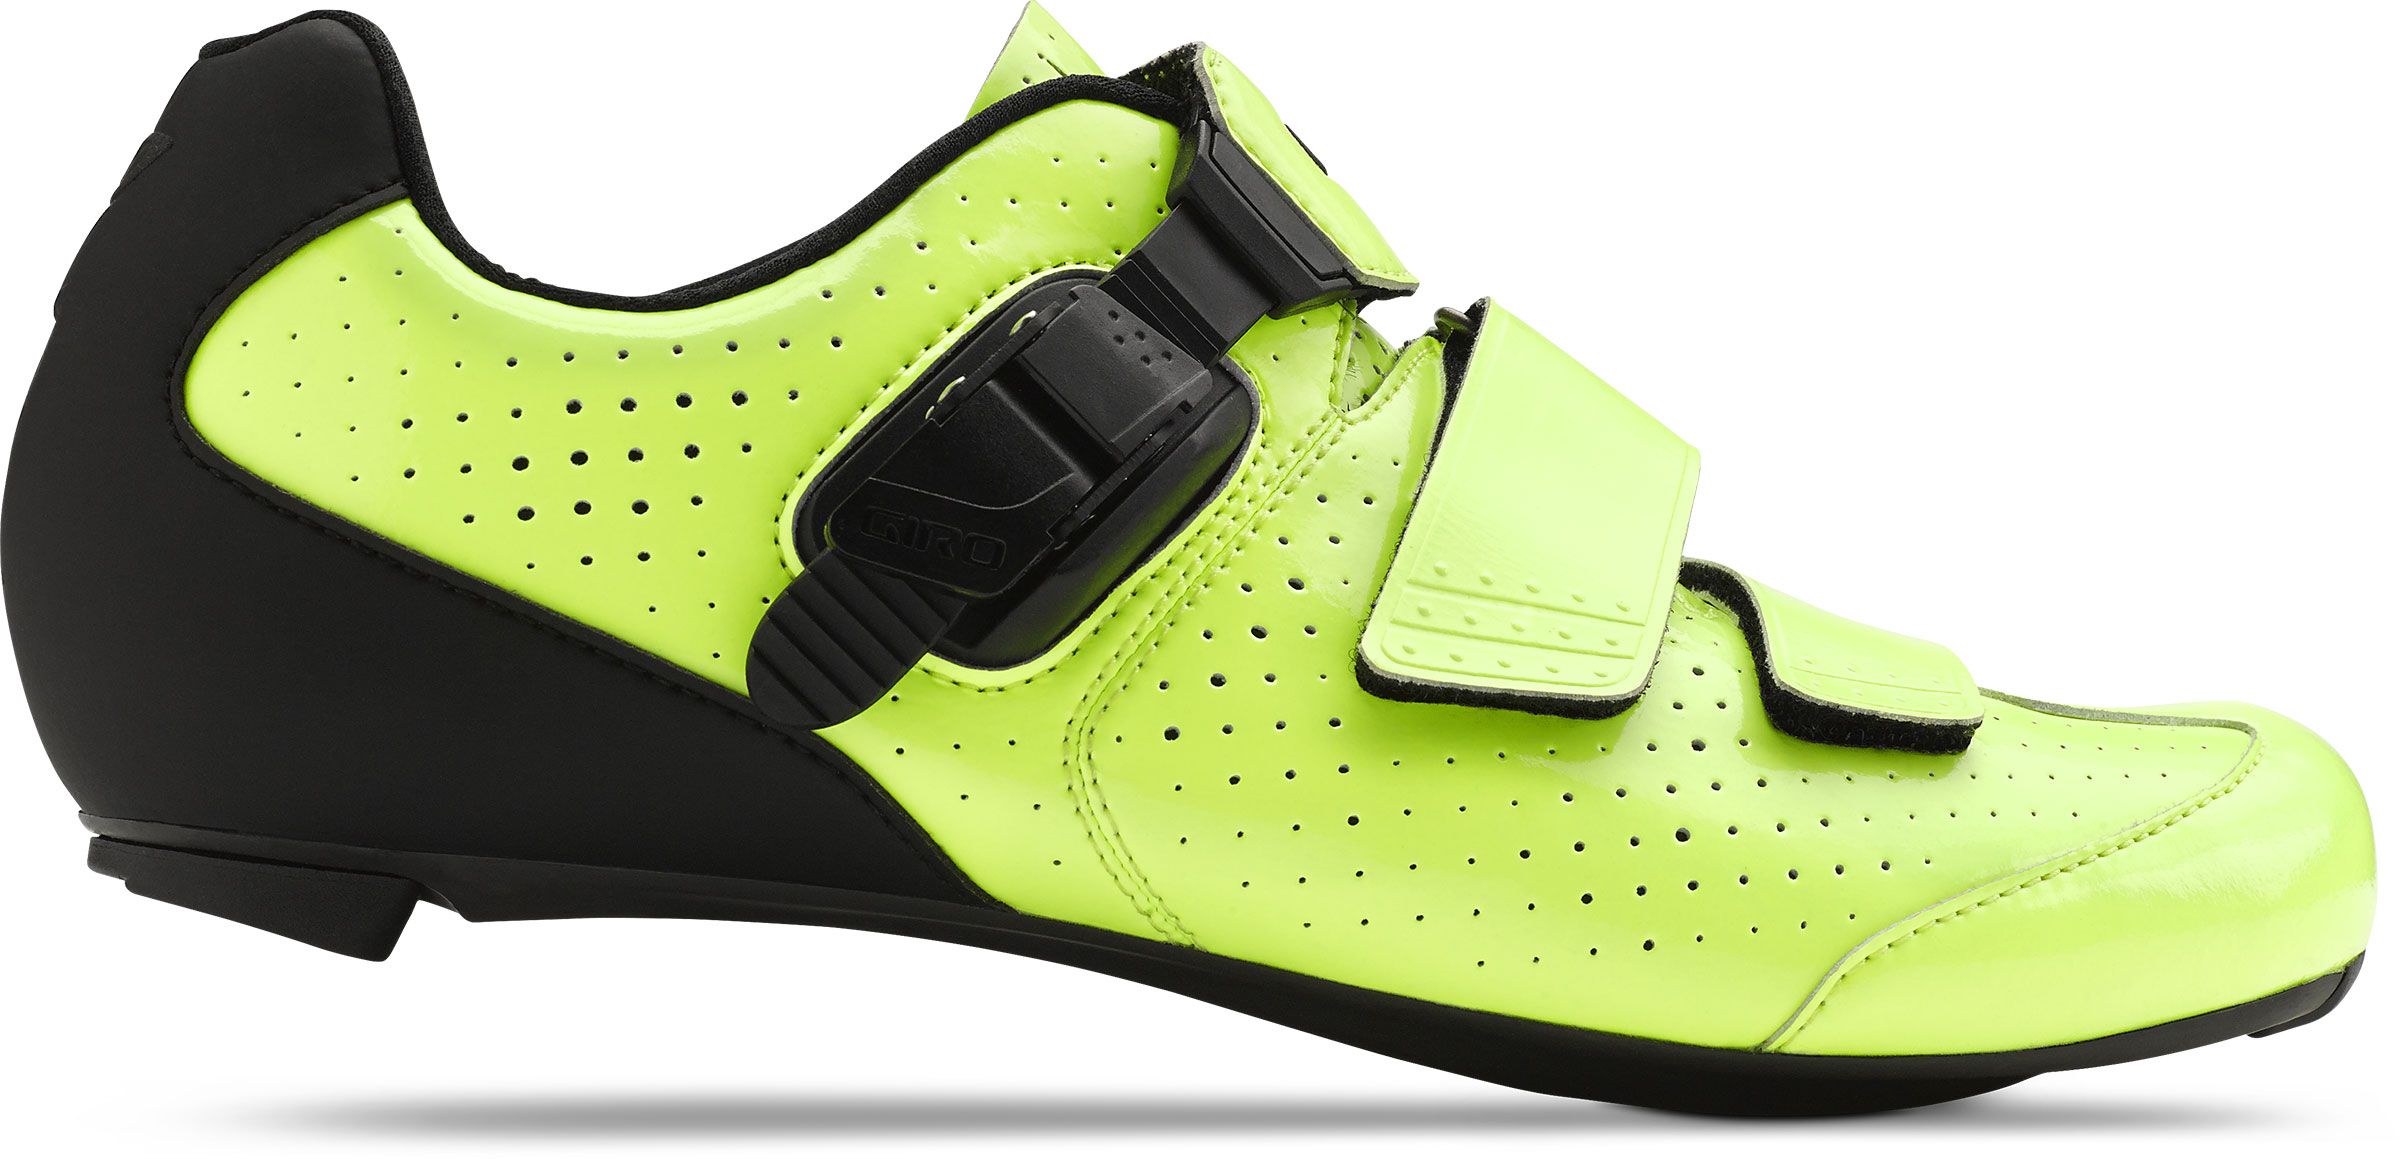 Details about   Giro Bike Shoes Trans E70 White Water Resistant Breathable Easy to Clean Light 